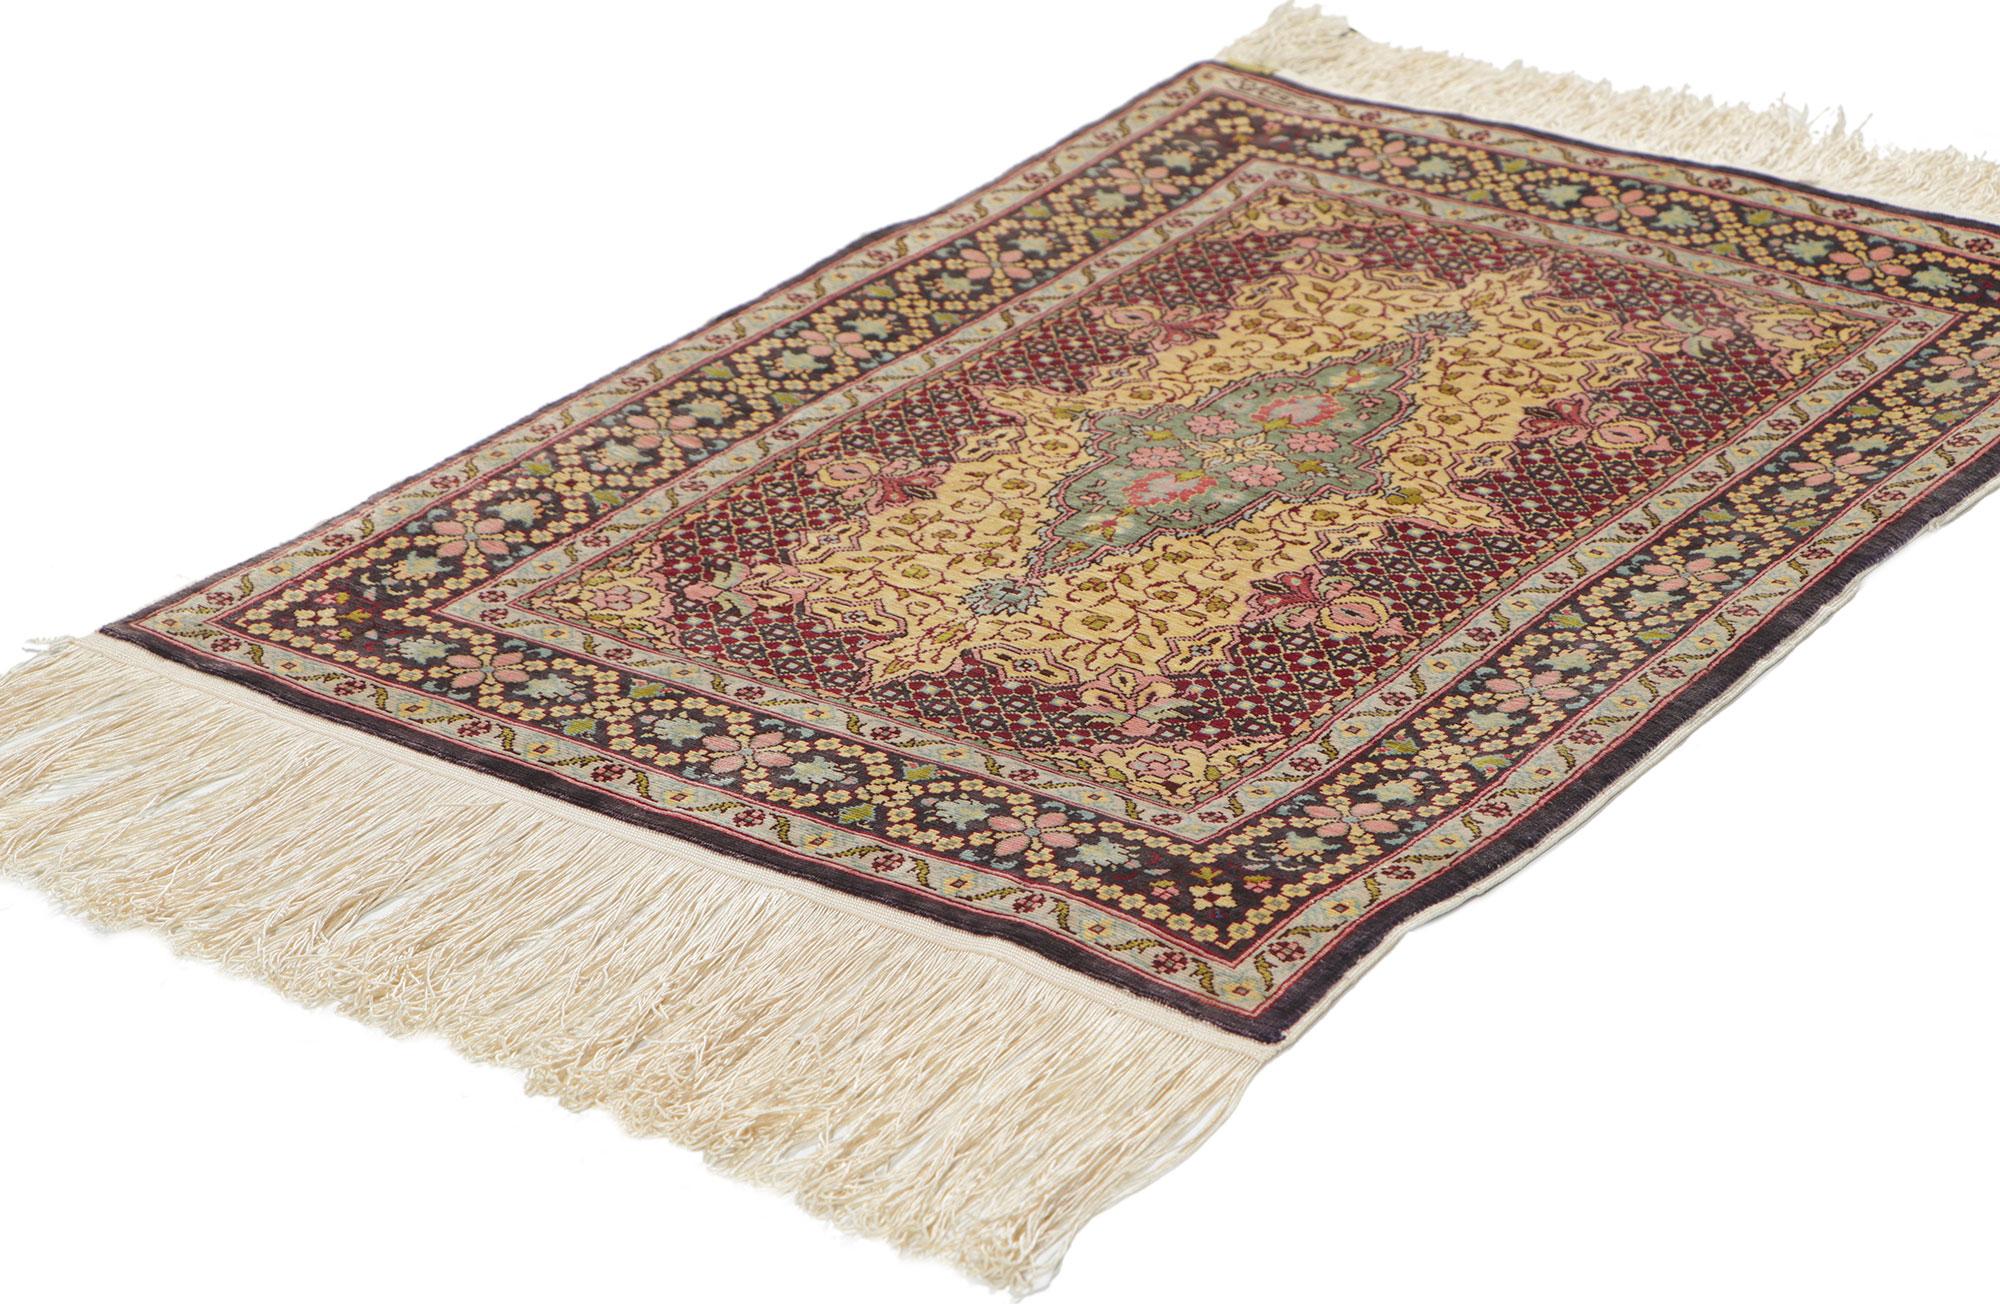 78516 Vintage Turkish Silk Hereke Rug, 01'04 x 02'00. Emanating traditional style with incredible detail and texture, this hand knotted silk Hereke rug is a captivating vision of woven beauty. The timeless design and refined color palette woven into